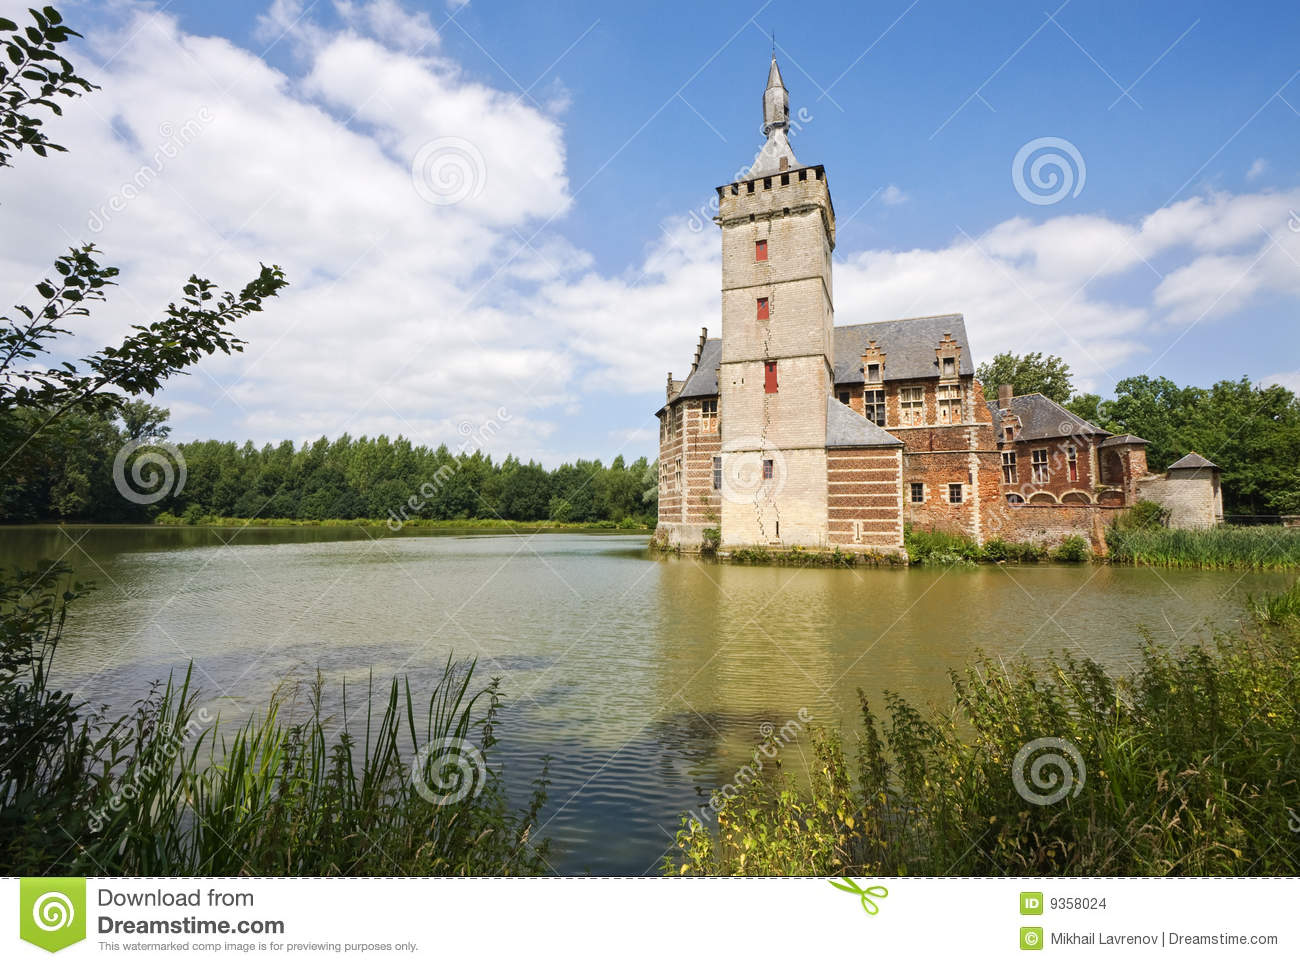 Amazing Horst Castle Pictures & Backgrounds